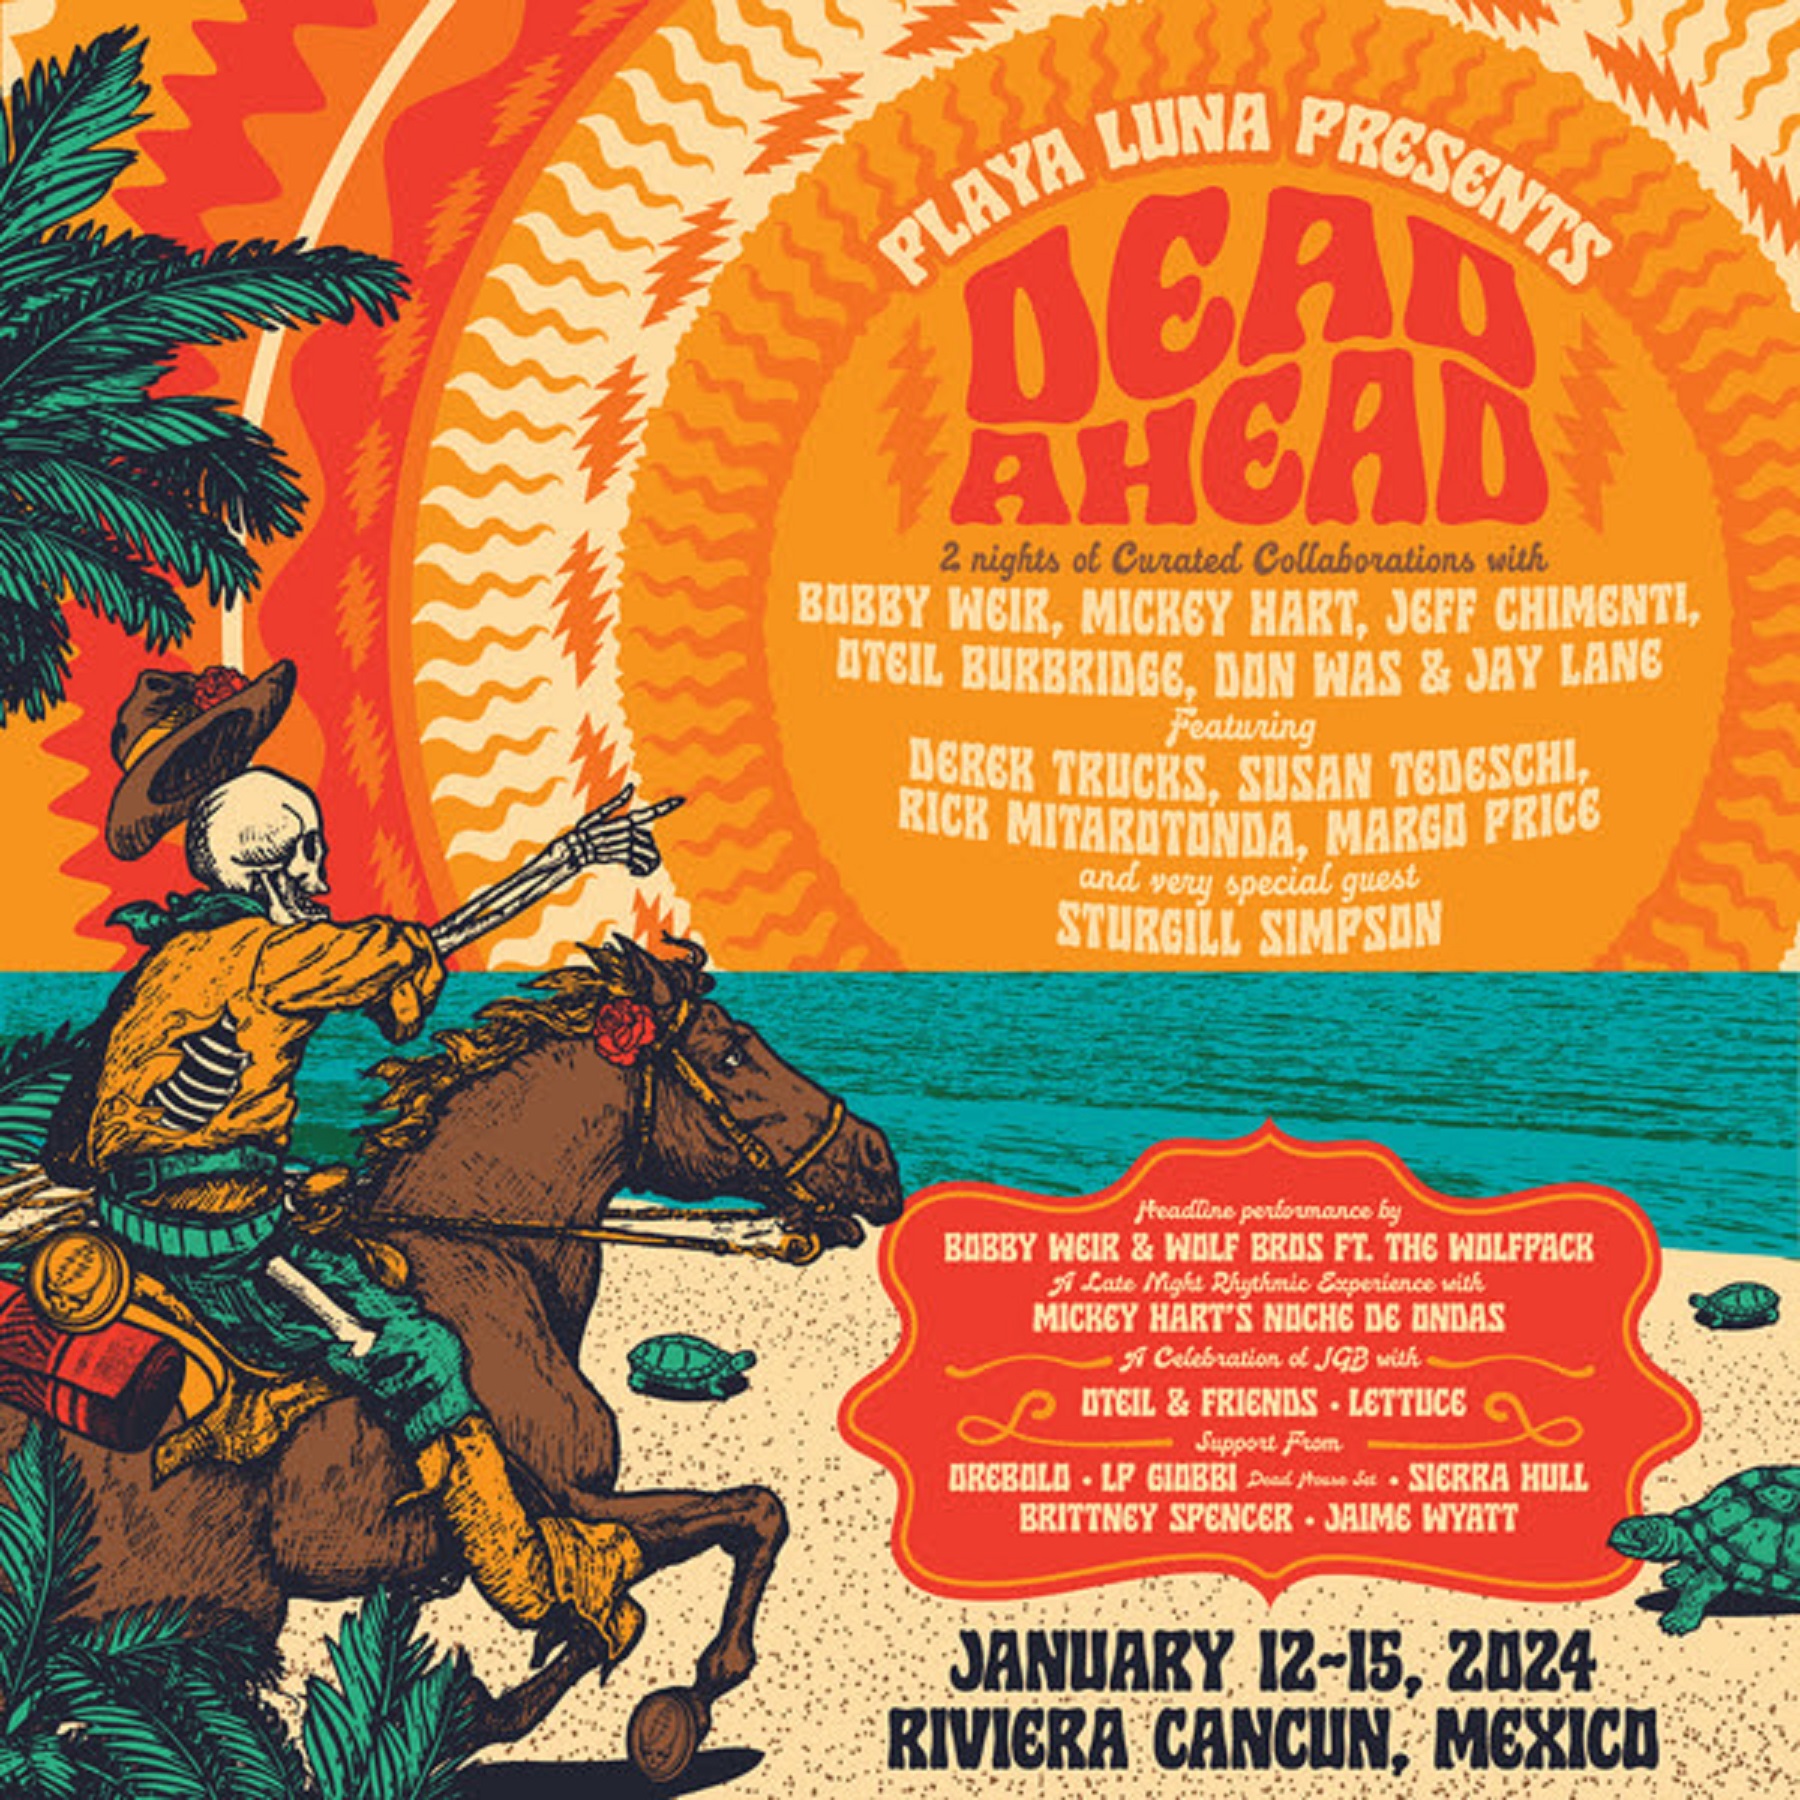 Playa Luna Presents: Dead Ahead, two nights of curated collaborations with Bobby Weir, Mickey Hart, Jeff Chimenti, Oteil Burbridge, Don Was & Jay Lane feat. Derek Trucks, Susan Tedeschi, Rick Mitarotonda, Margo Price + very special guest Sturgill Simpson